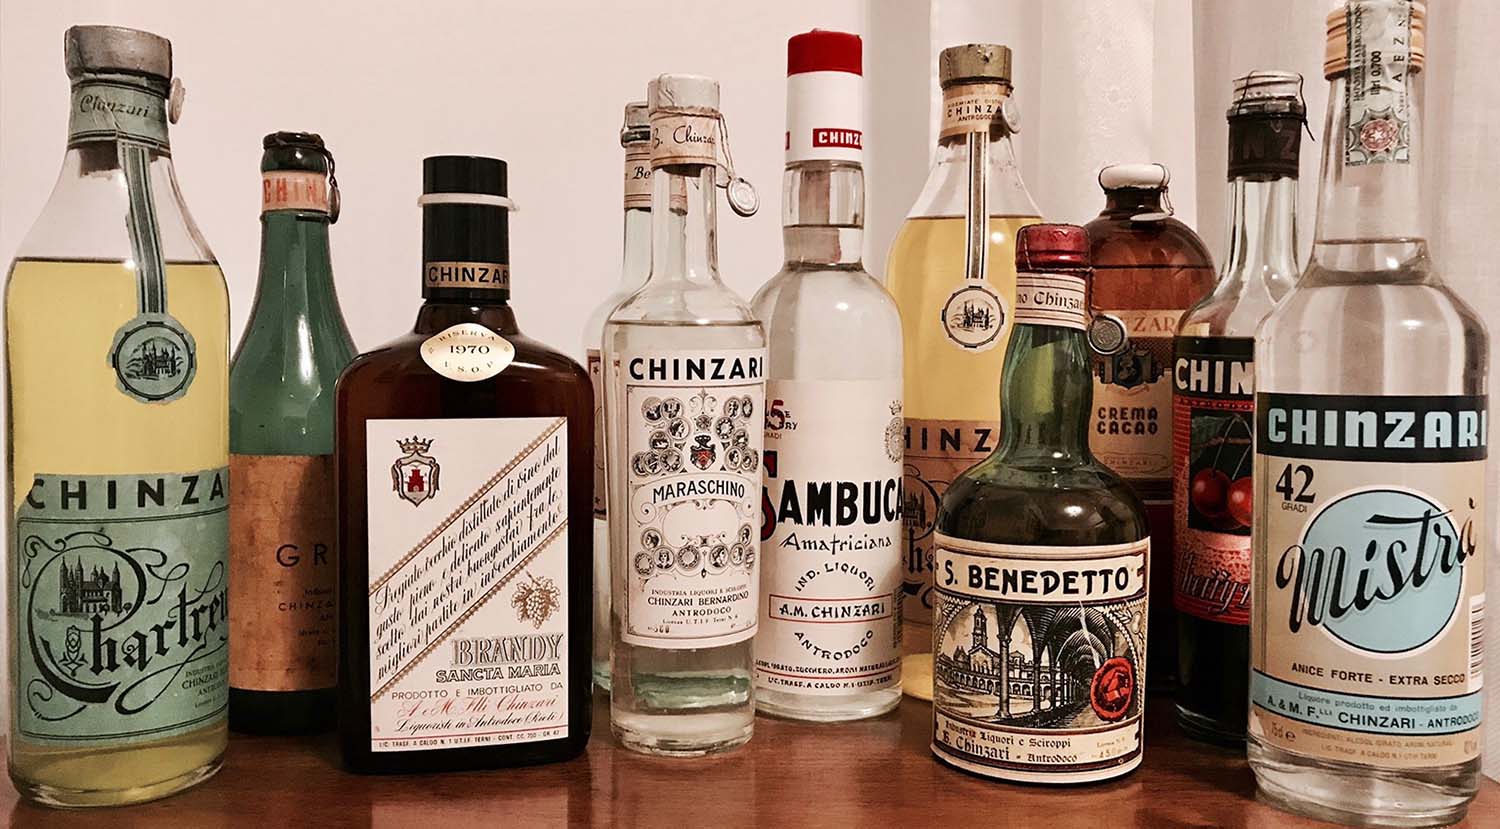 Bottles of Chinzari, Italian family business and producer of fine liqueurs.